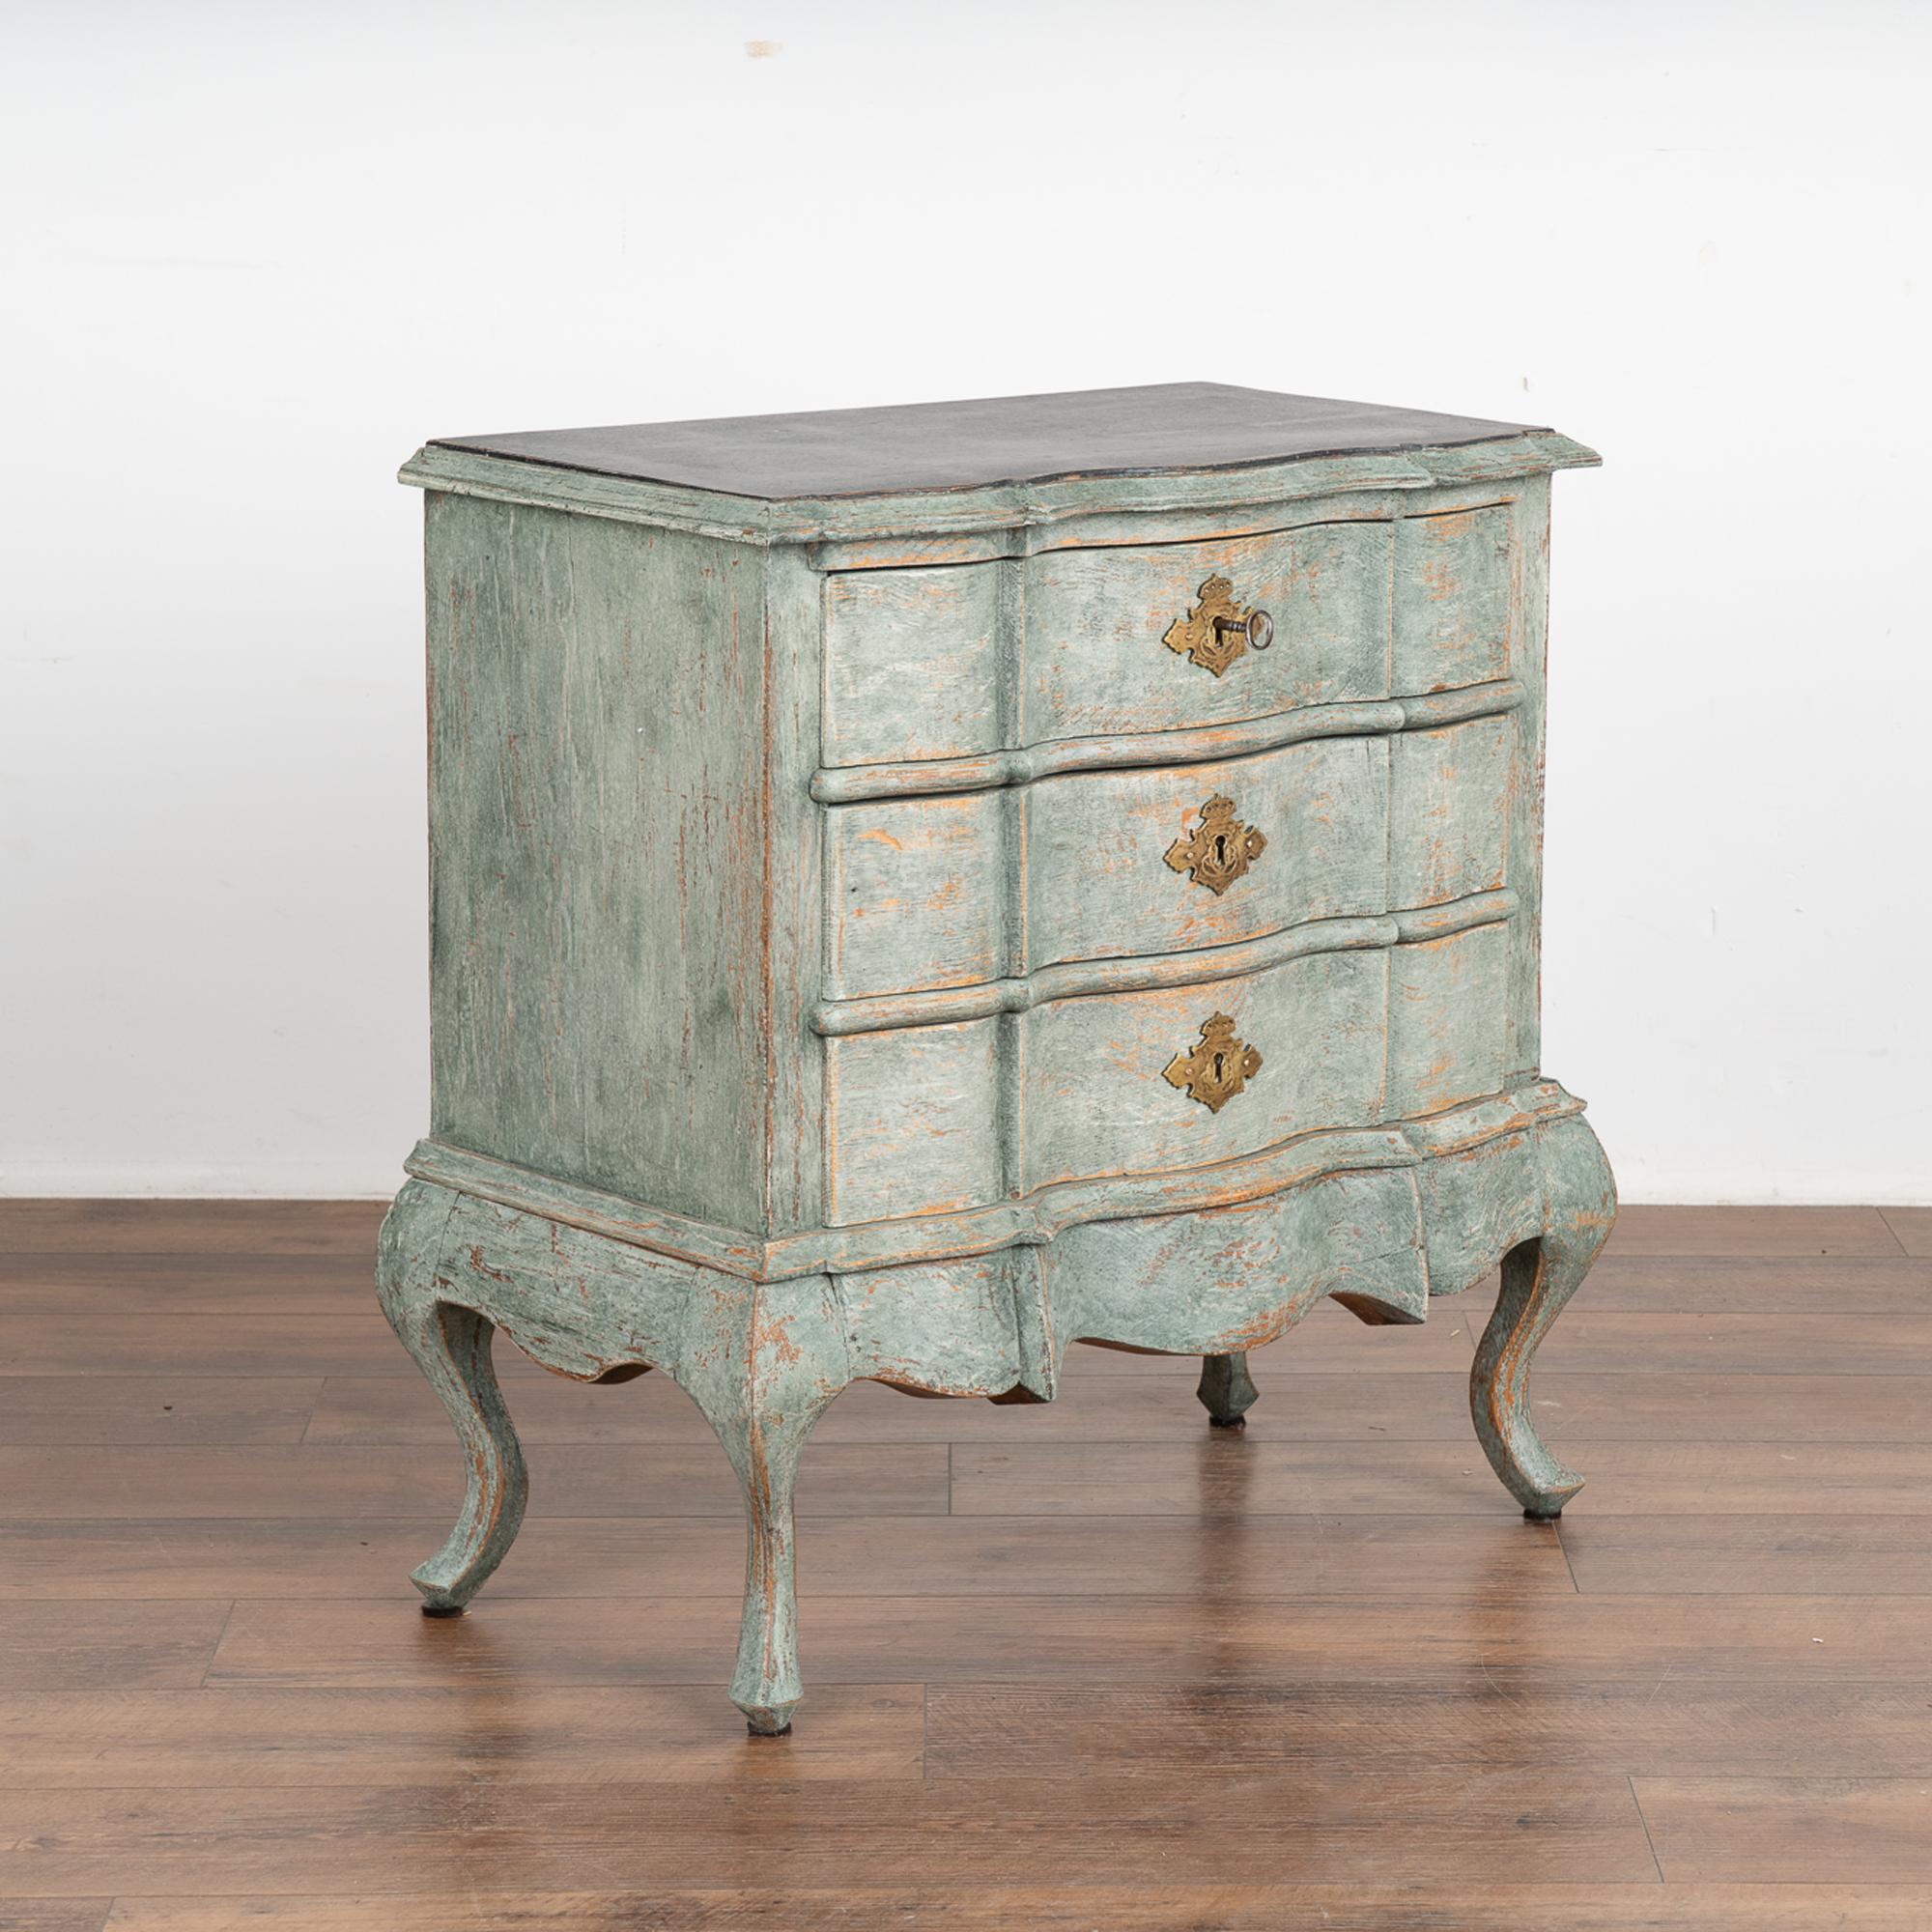 A small oak rococo chest of three drawers with brass key escutcheons. The scalloped edge of the top is carried down through the 3 drawer fronts and bottom apron resulting in an elegant, bow front case all resting on four cabriole legs.
The newer,